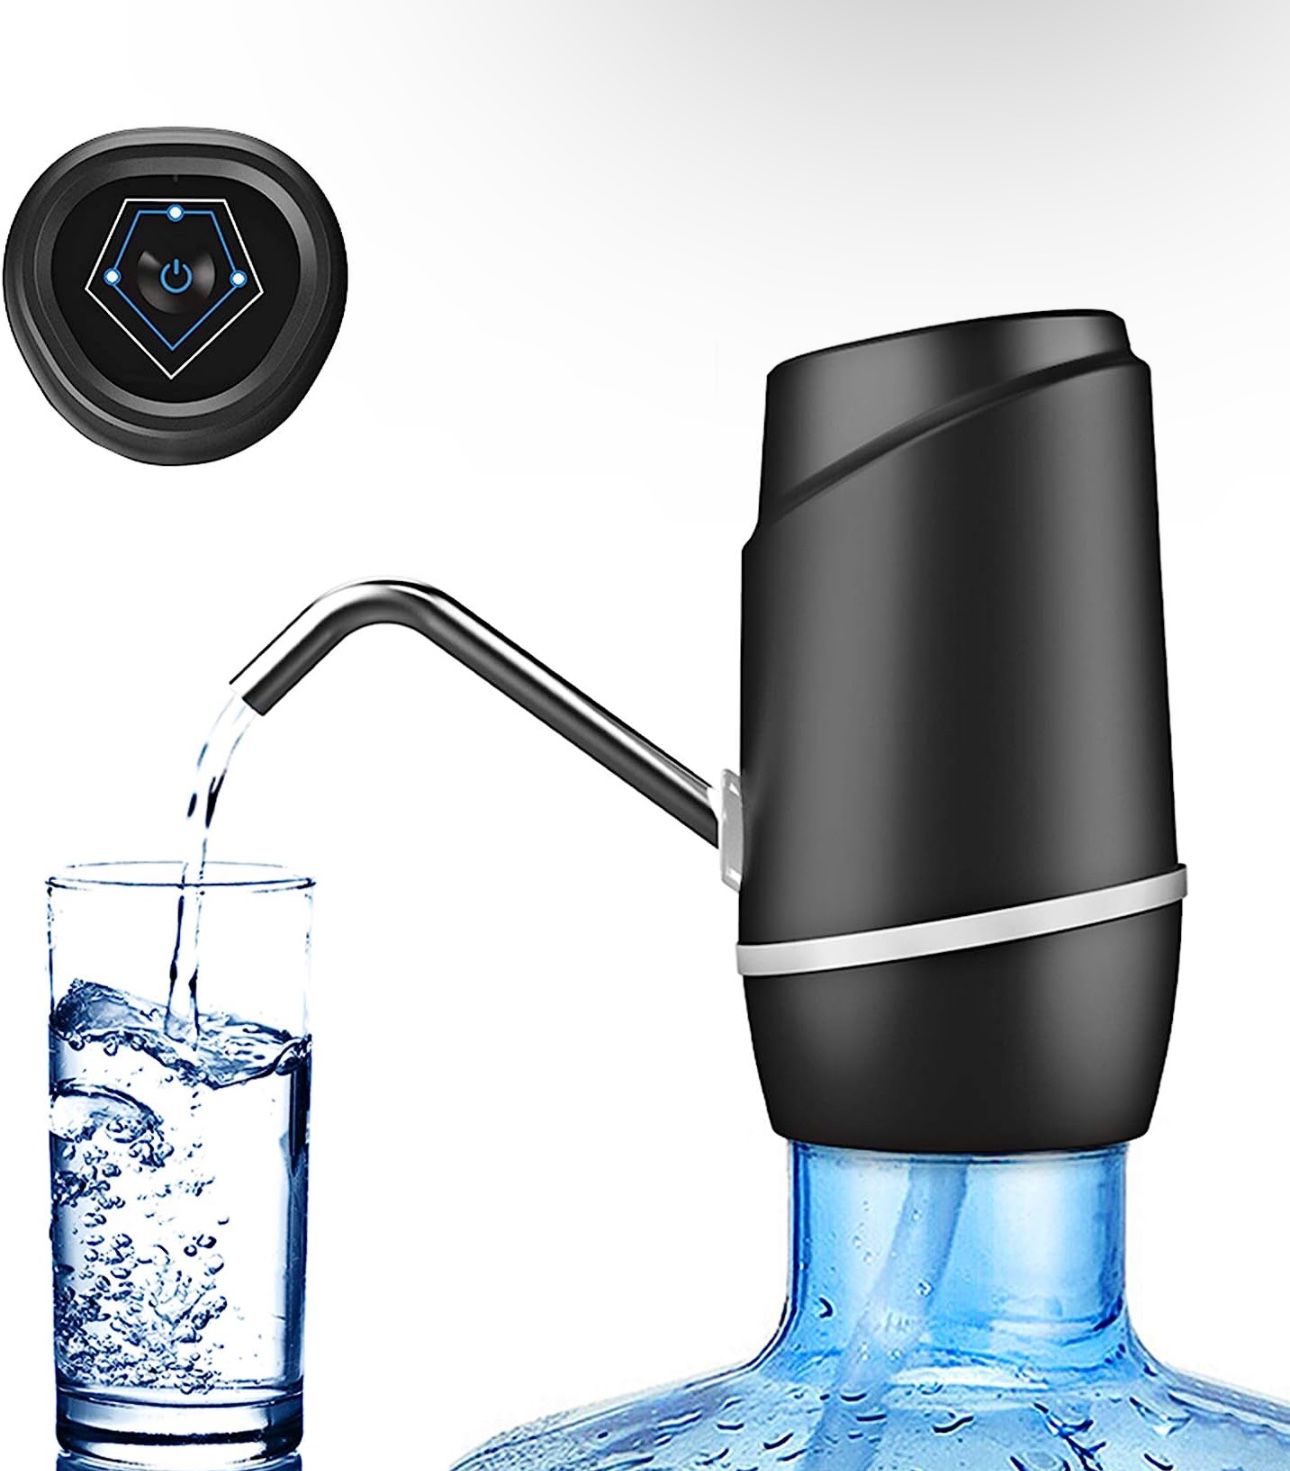 5 Gallon Electric Drinking Portable Water Dispenser, Universal USB Charging Water Bottle Pump For 2-5 Gallon With 2 Silicone